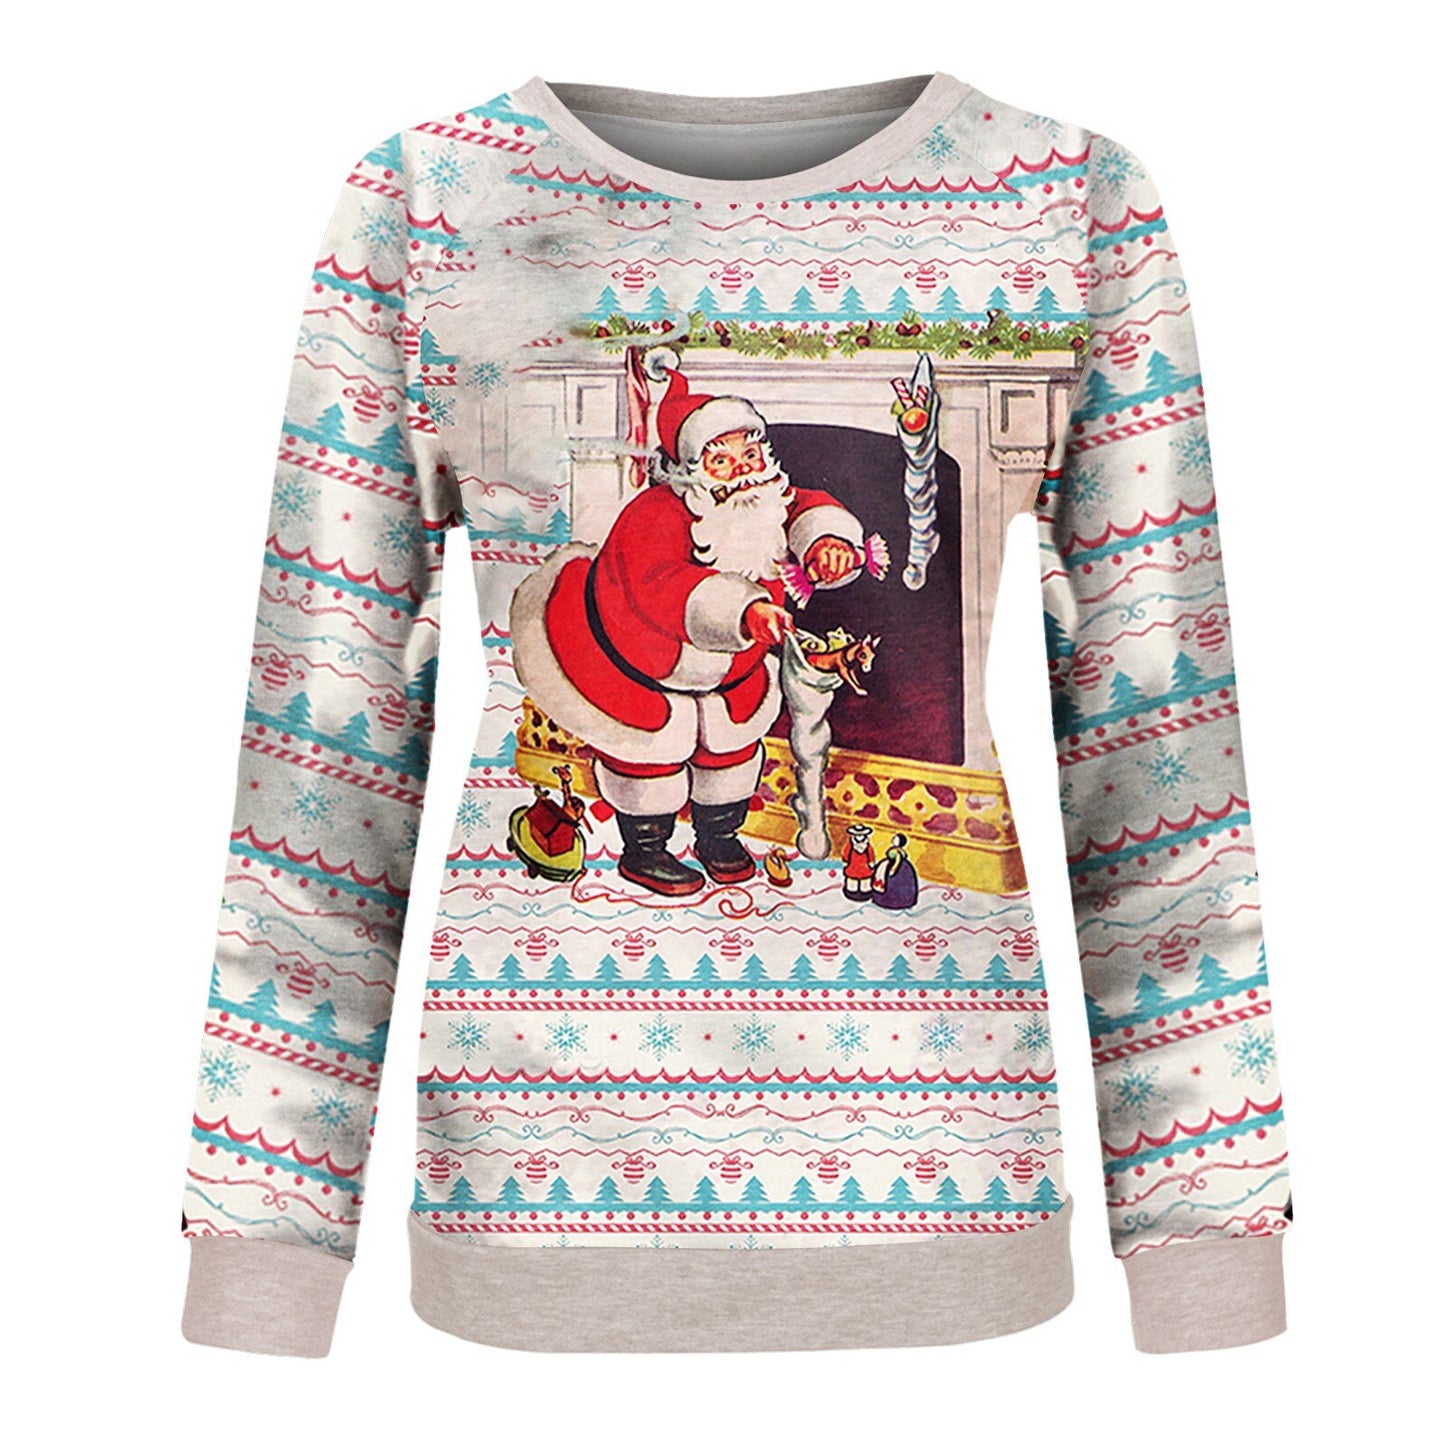 Long Sleeve Women Christmas Sweatshirt with Printed Snowman Fashion Pullover Top